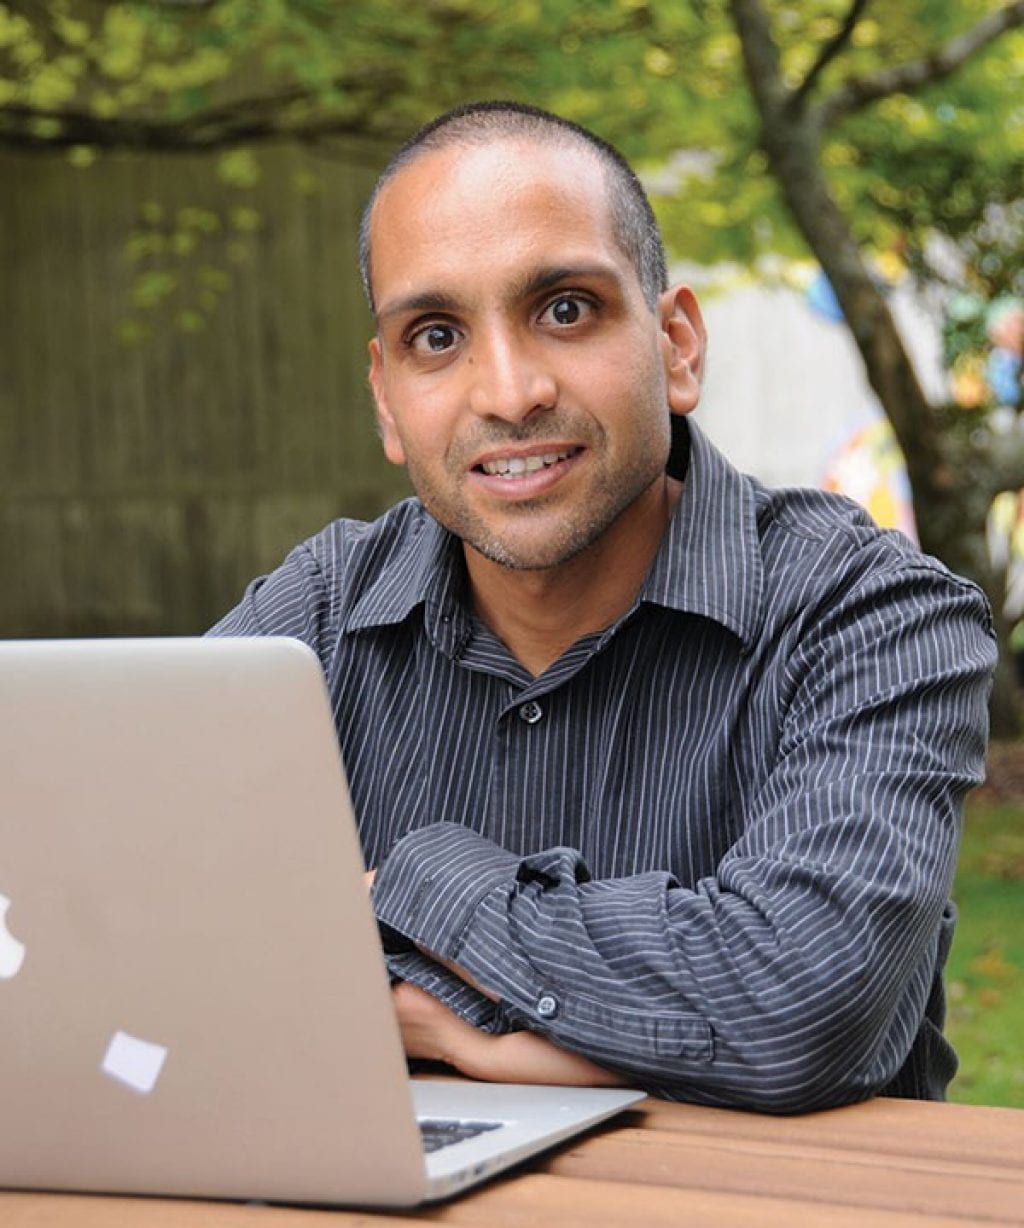 Dr. Shah sits outside on a table in front of a laptop looking at the camera